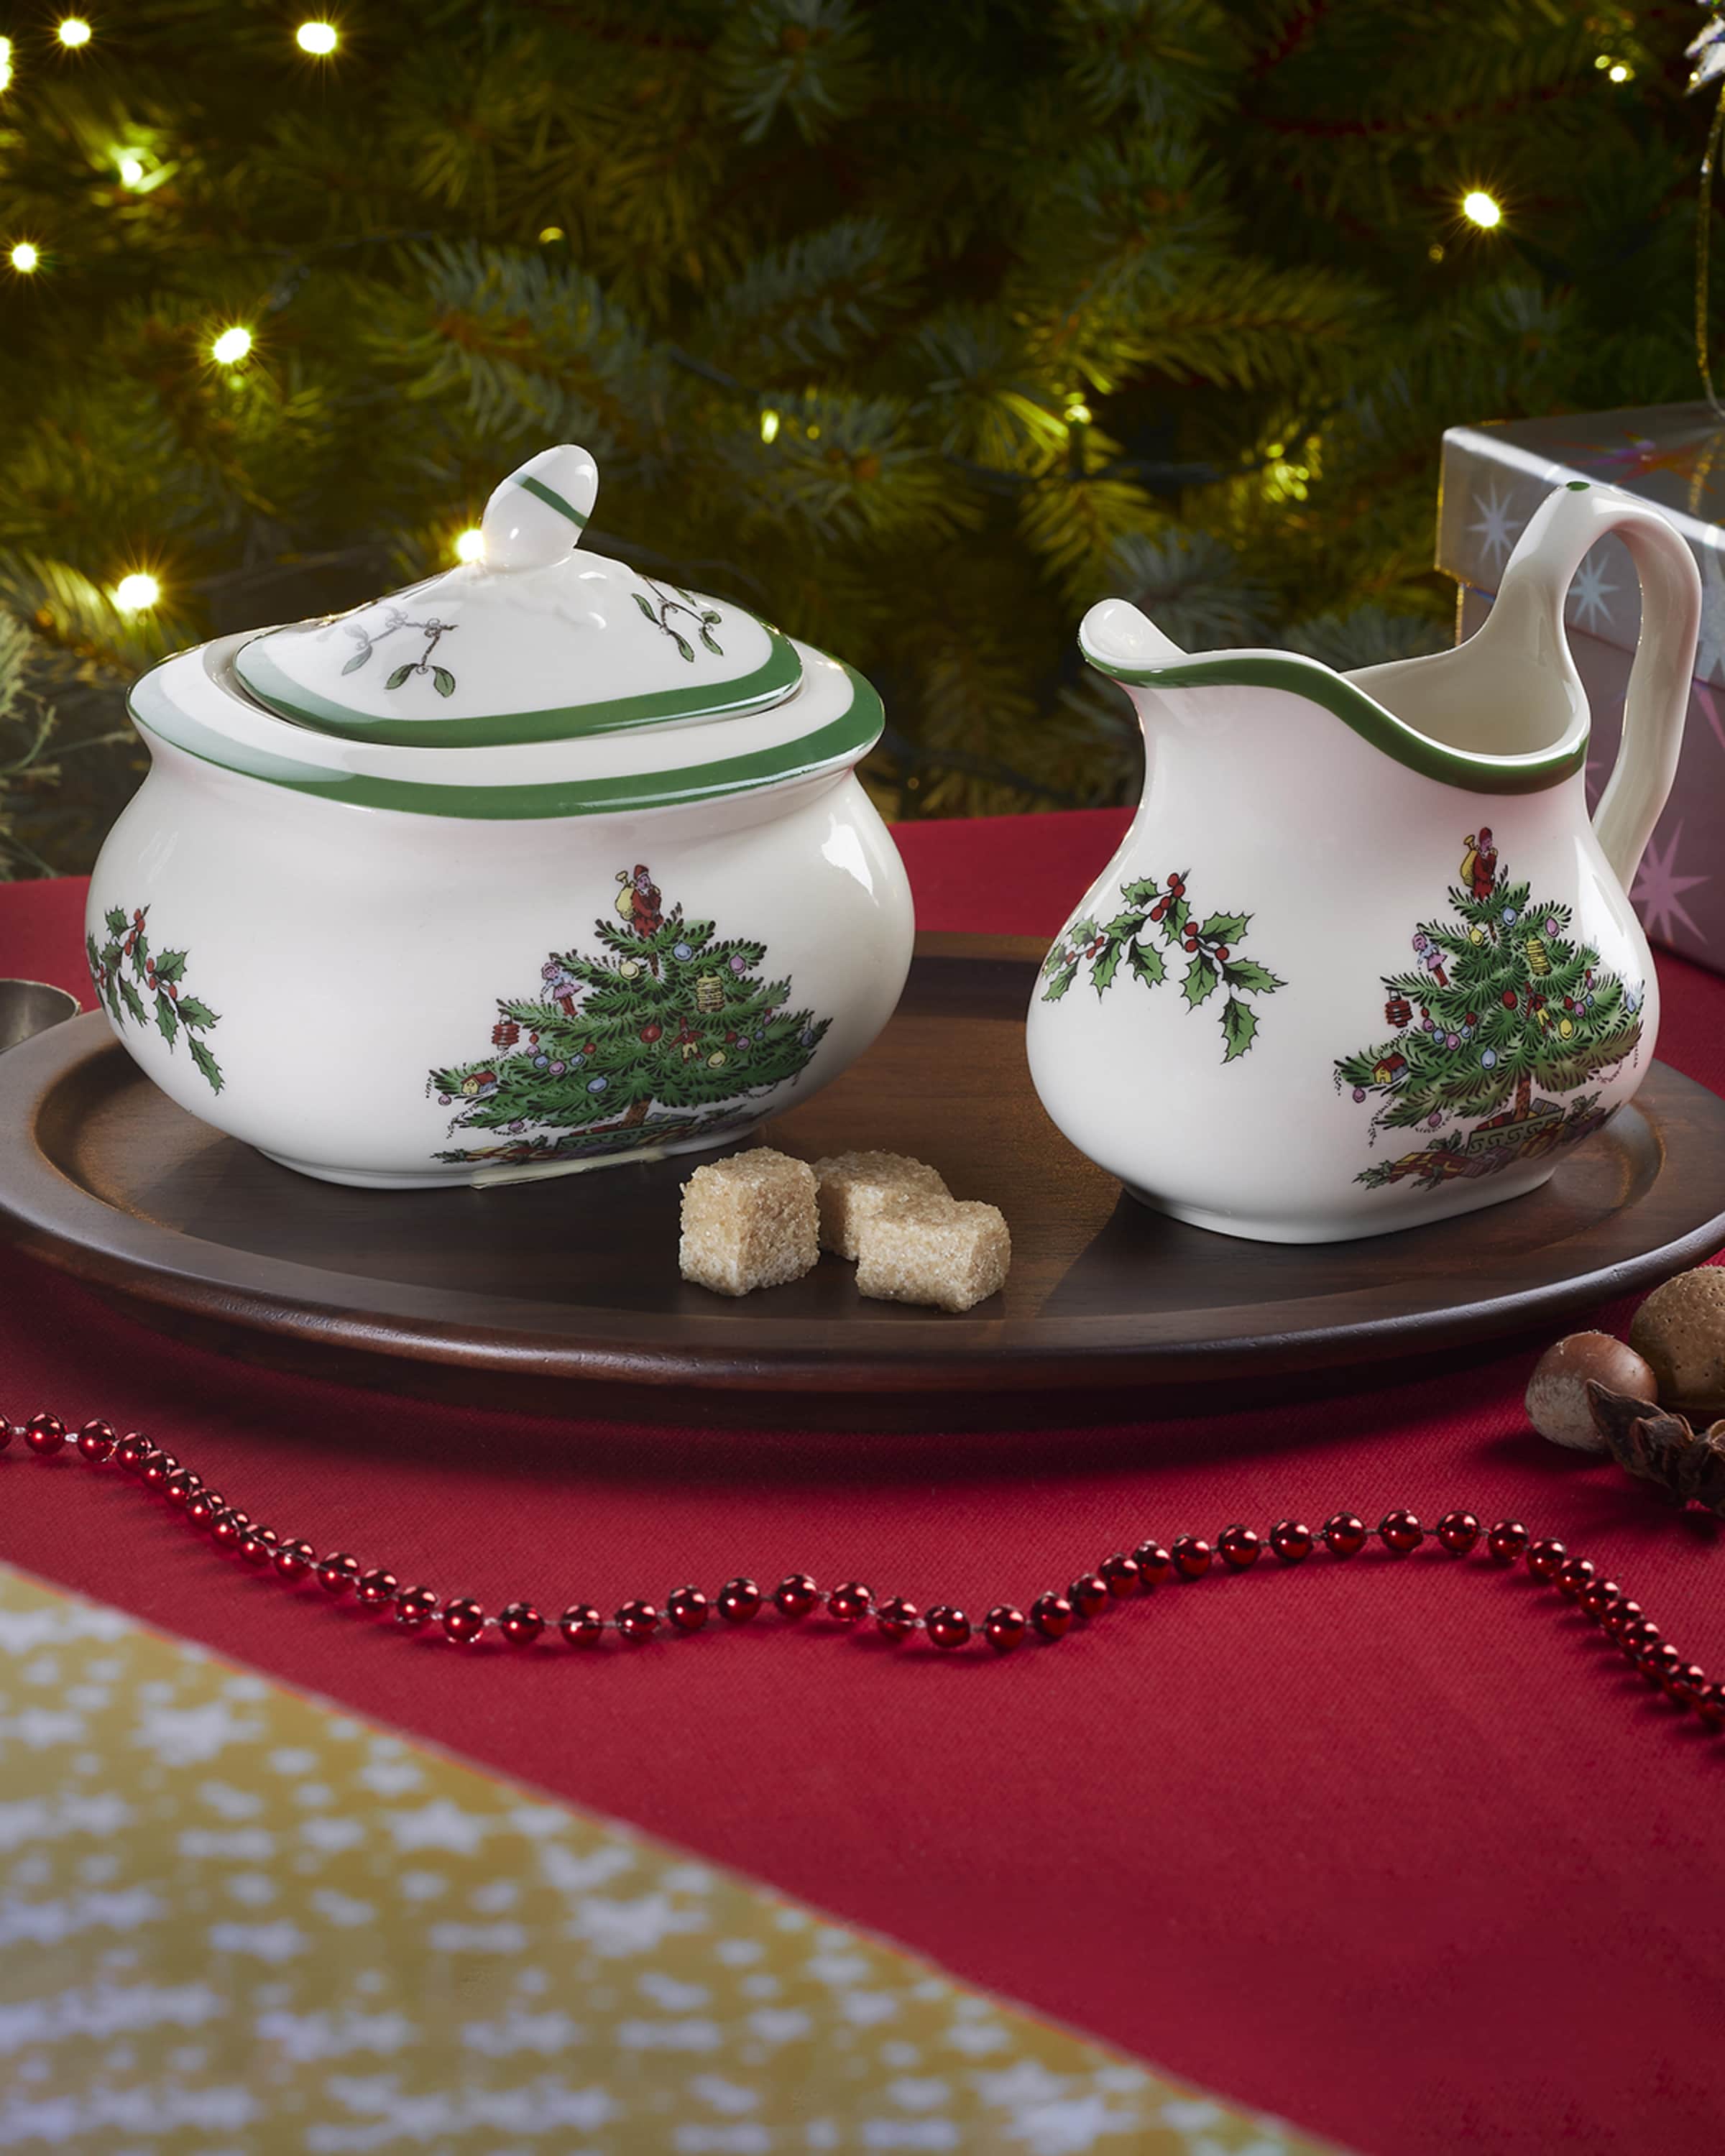 Spode Bakeware Christmas Tree Collection - Macy's